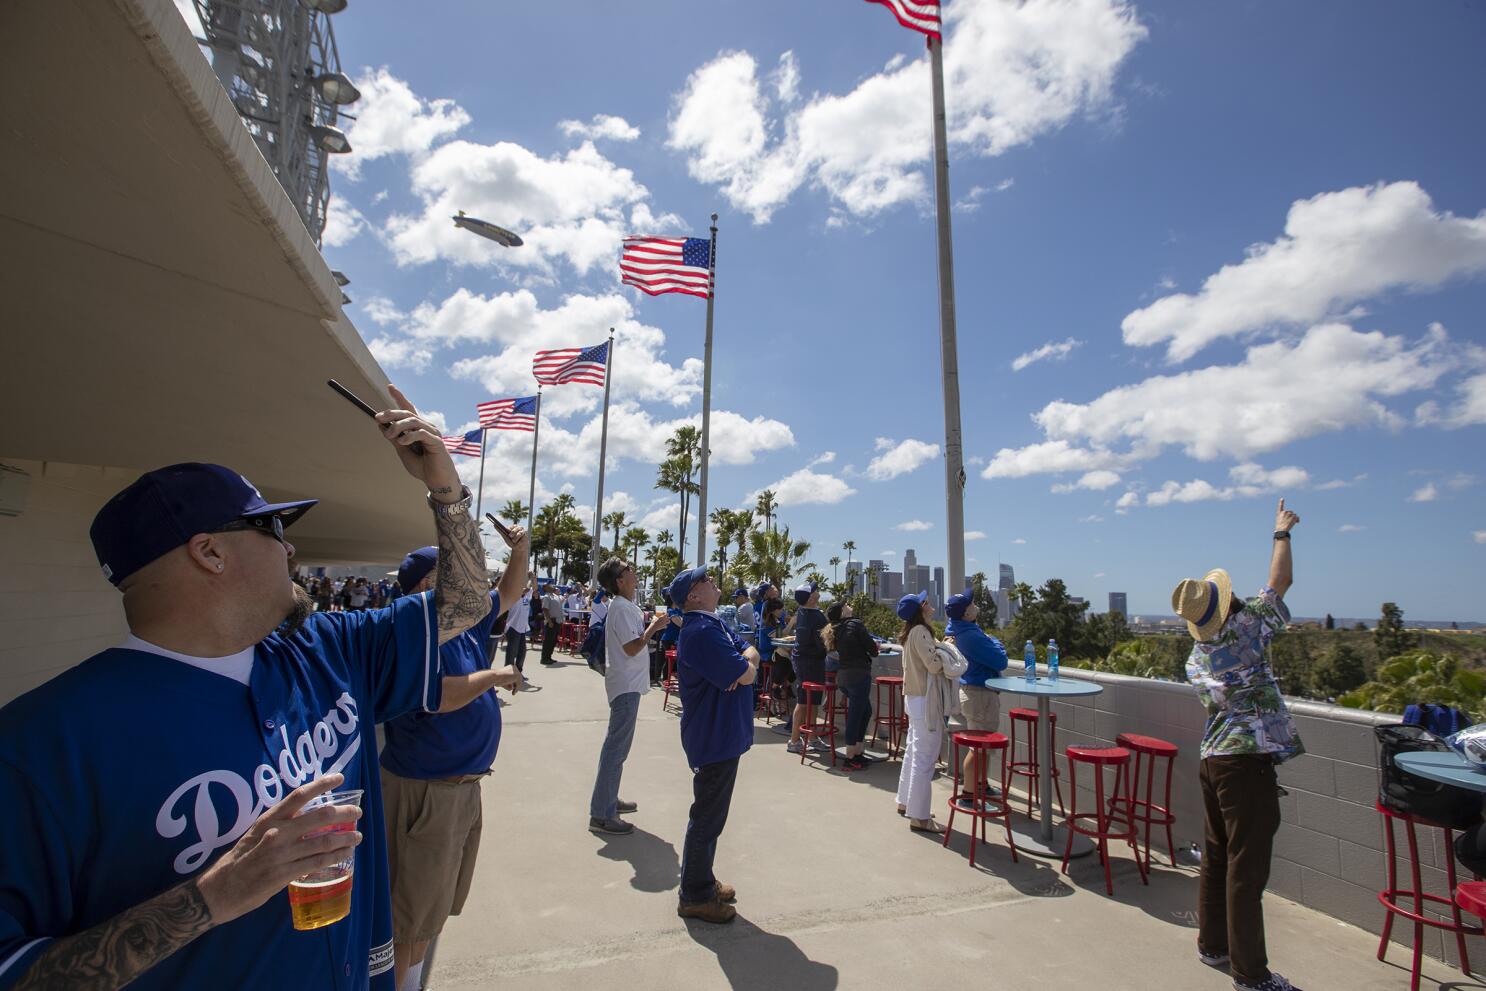 Presenting 'Los Dodgers,' dressed in blue from head to toe - Los Angeles  Times